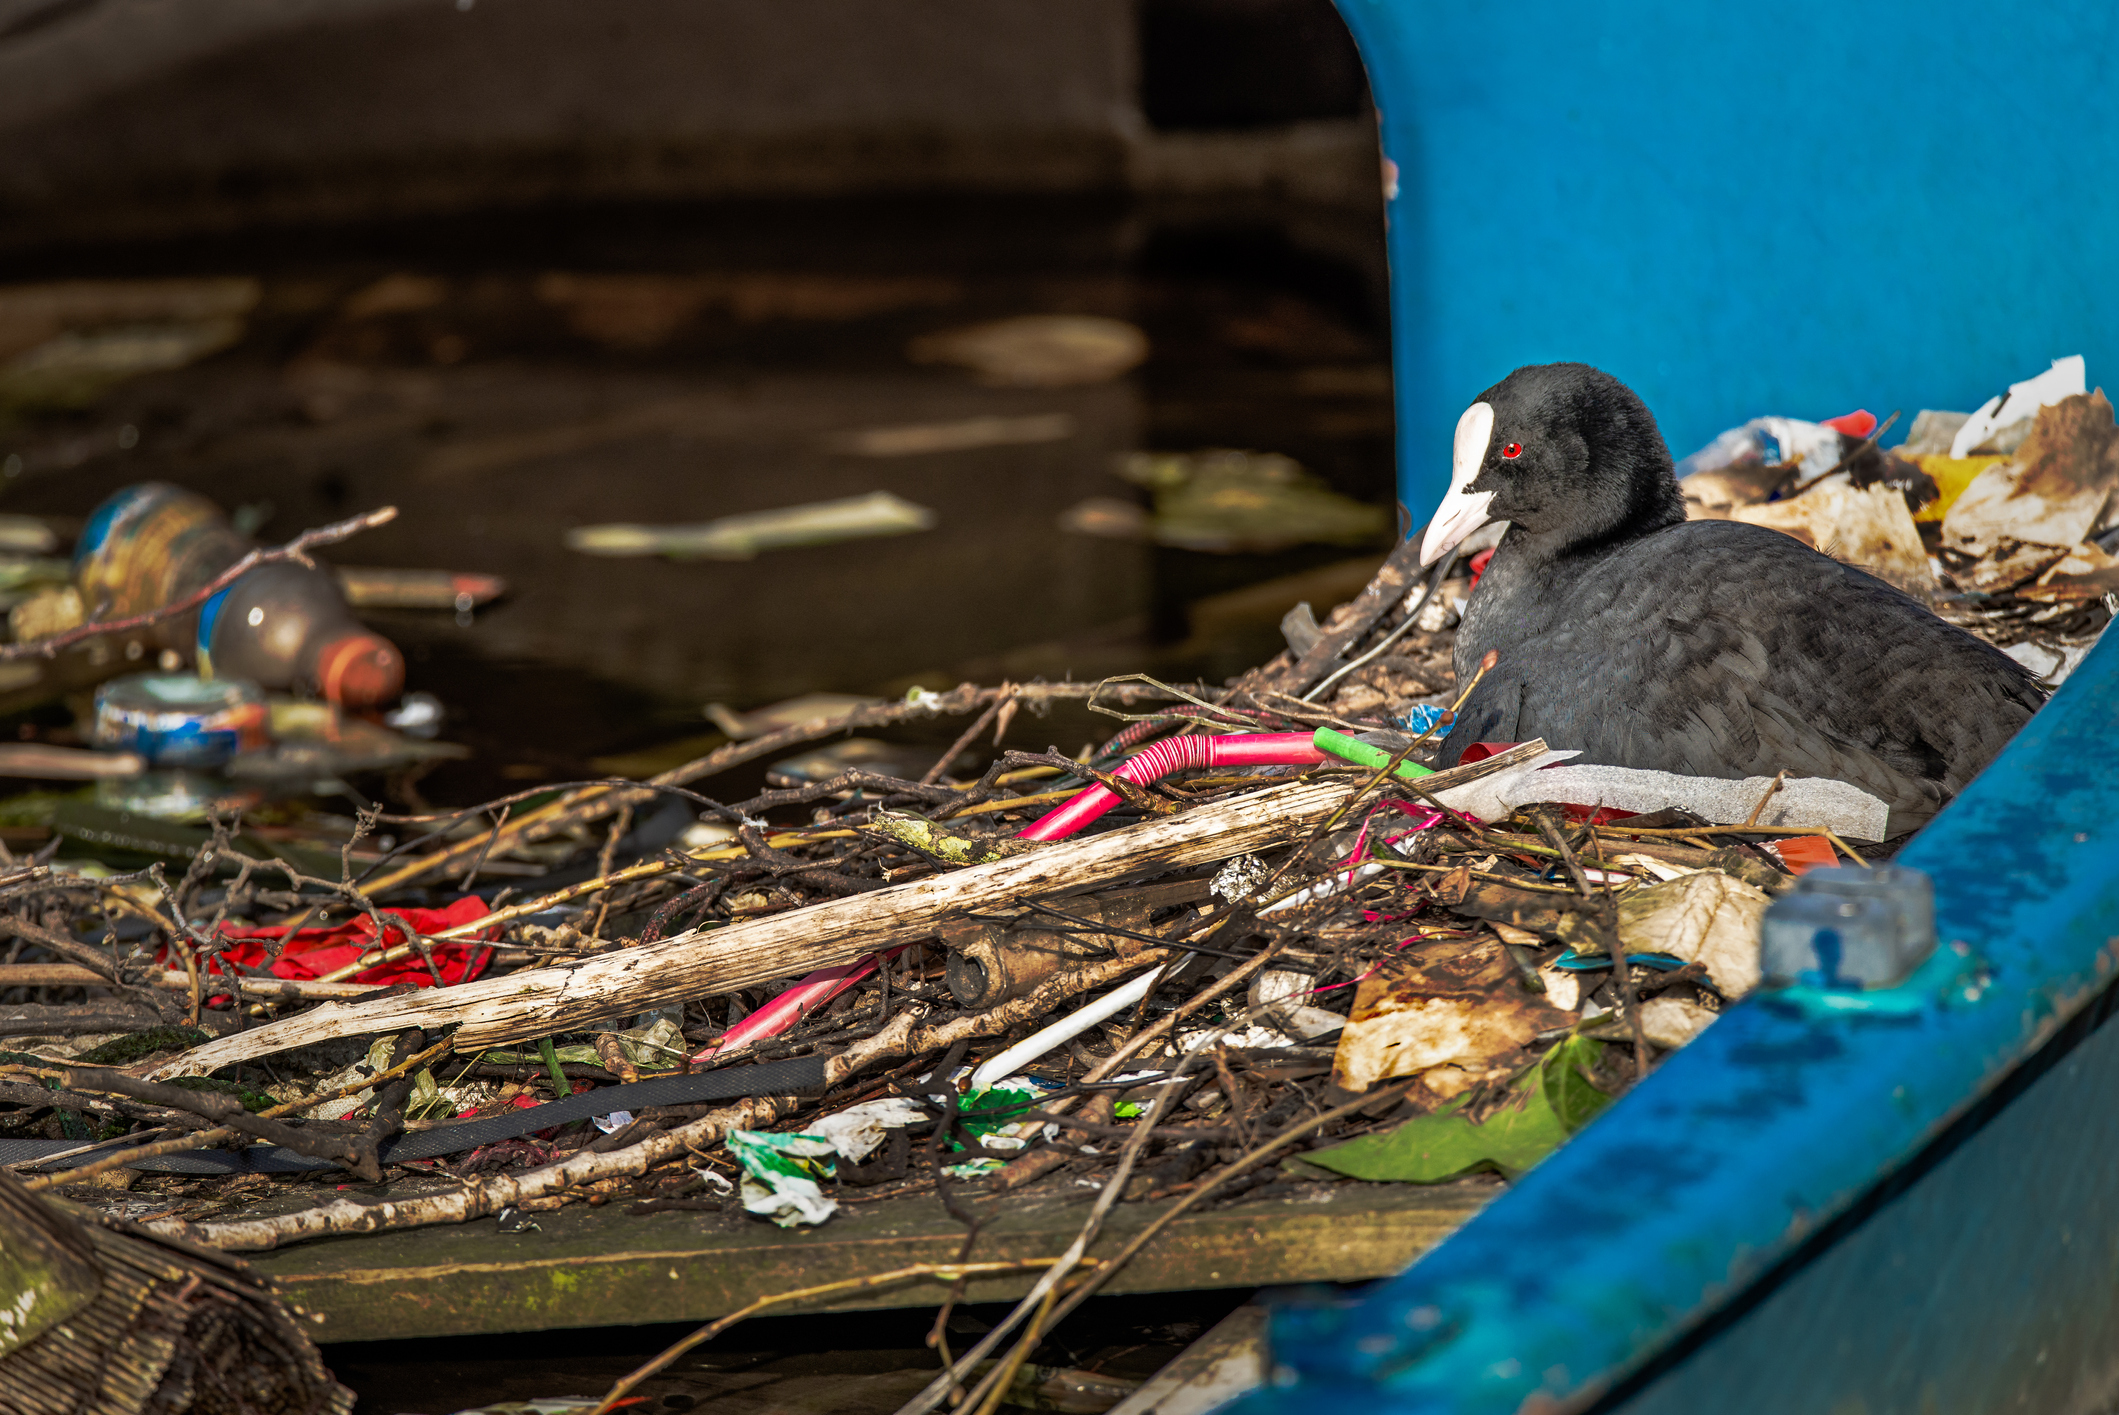 Plastic Pollution Robs Us of Our Wildlife: So Let's Change – HAY! Straws